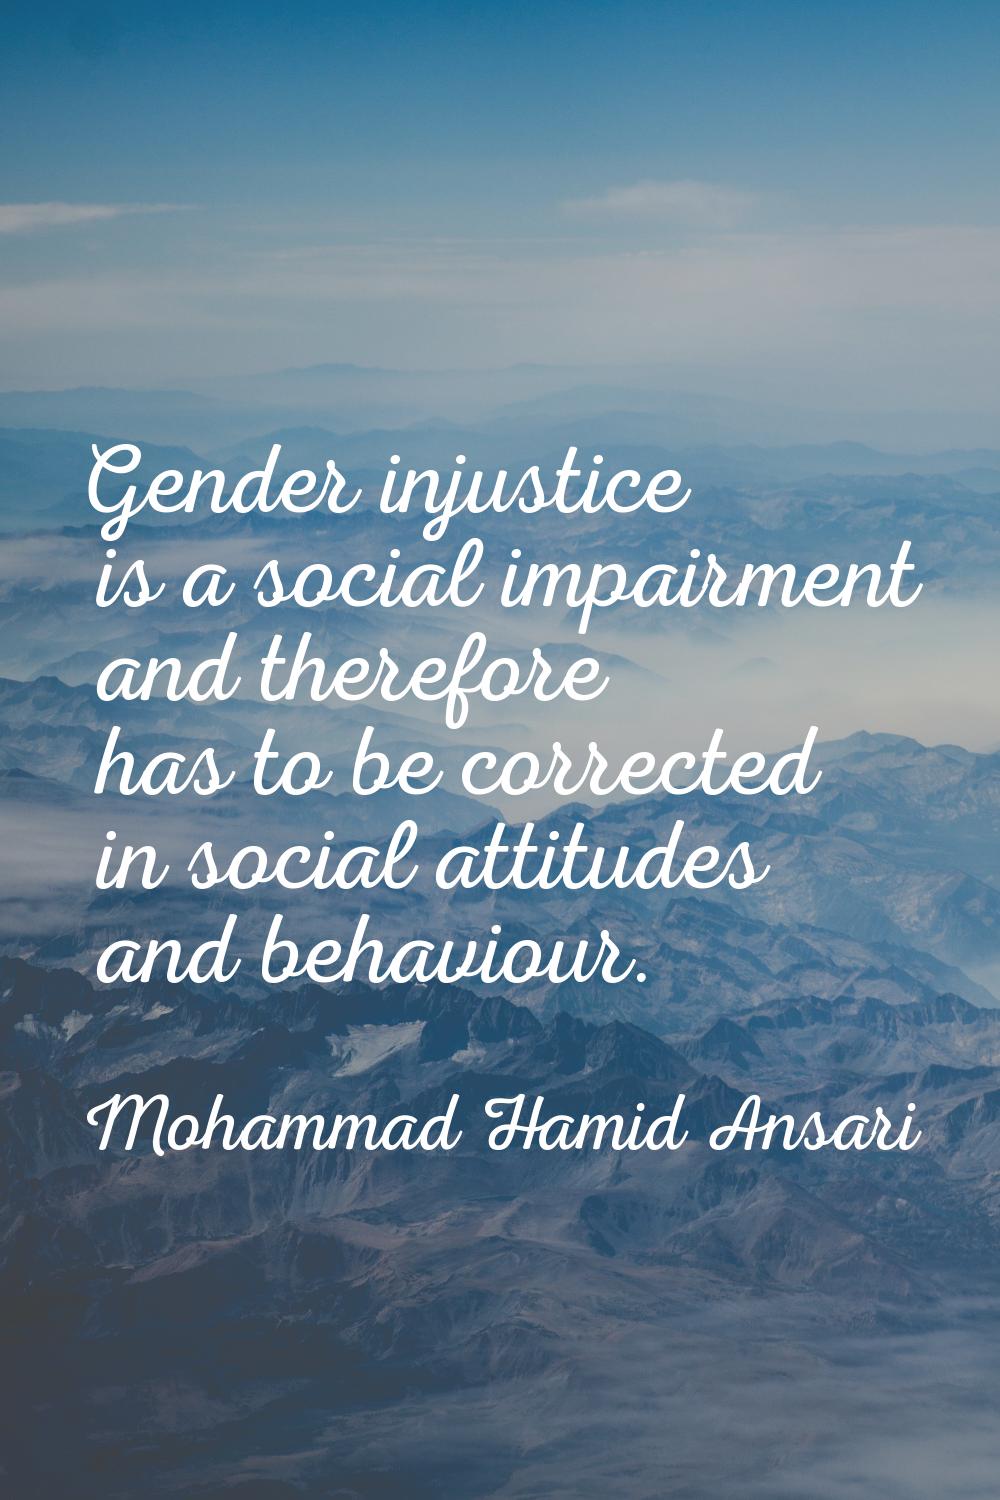 Gender injustice is a social impairment and therefore has to be corrected in social attitudes and b